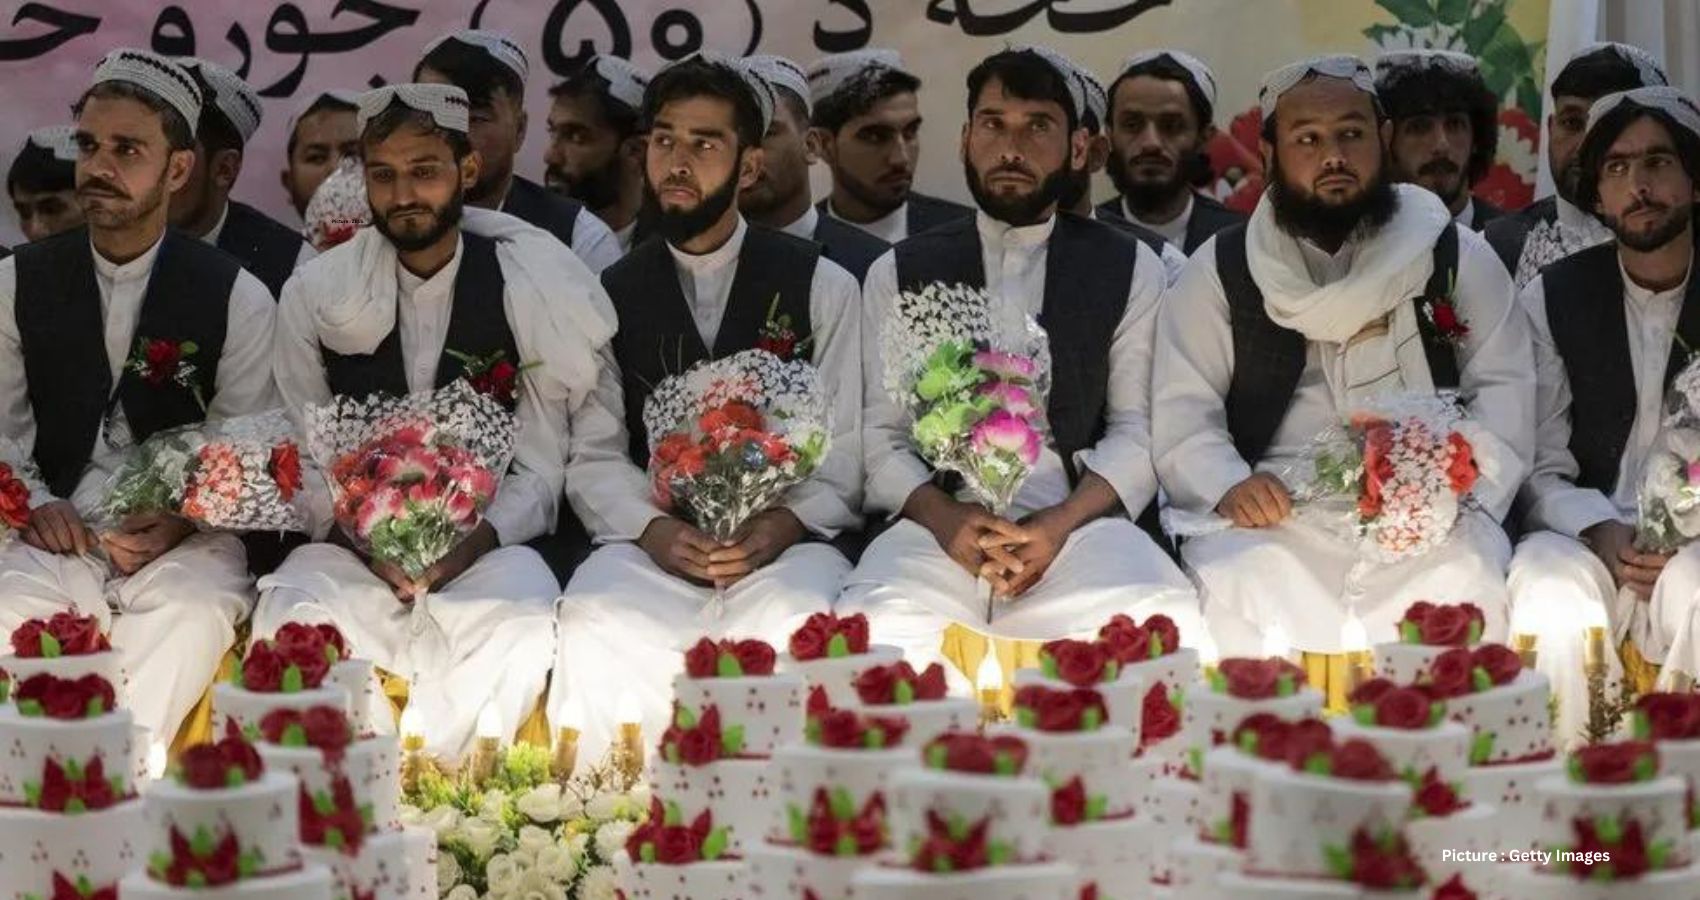 Featured & Cover Mass Wedding in Kabul A Symbol of Love Amid Economic Challenges (1)